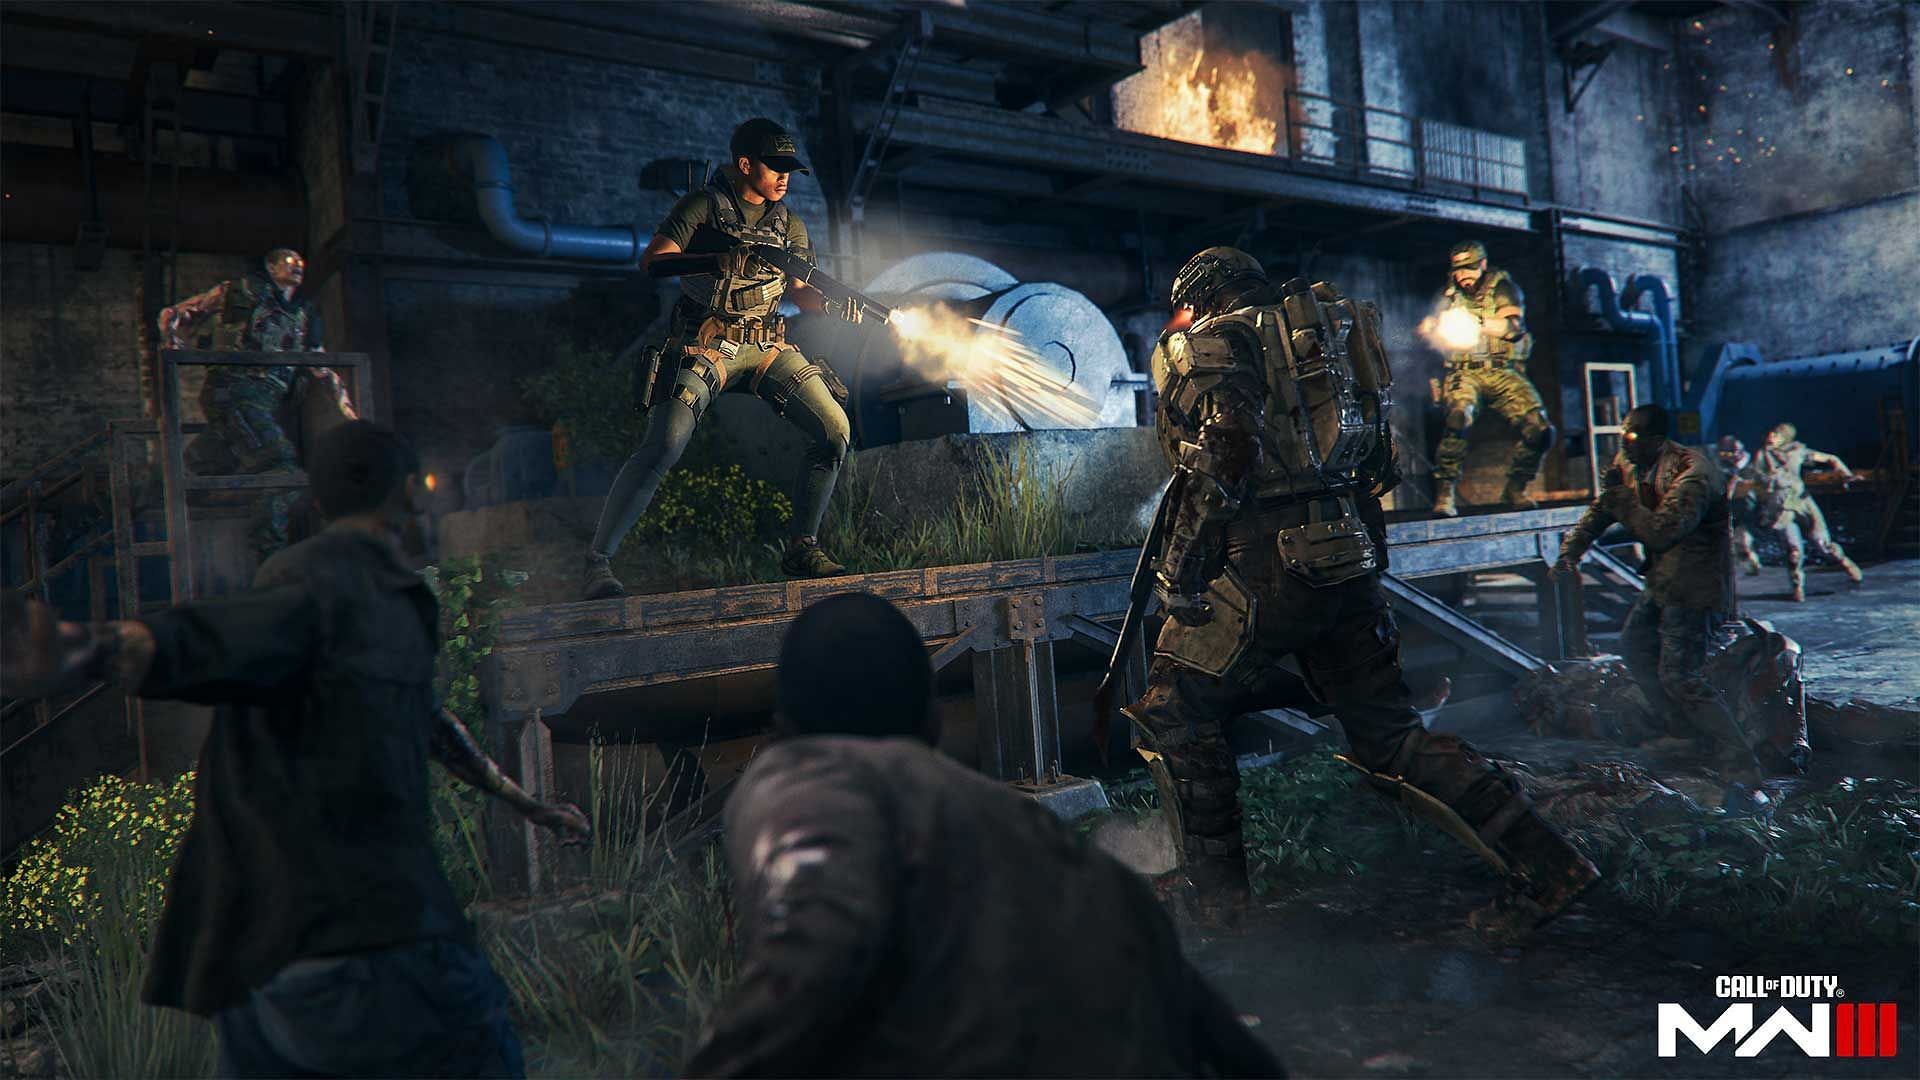 Modern Warfare 3 Zombies beta to reportedly roll out ahead of the release